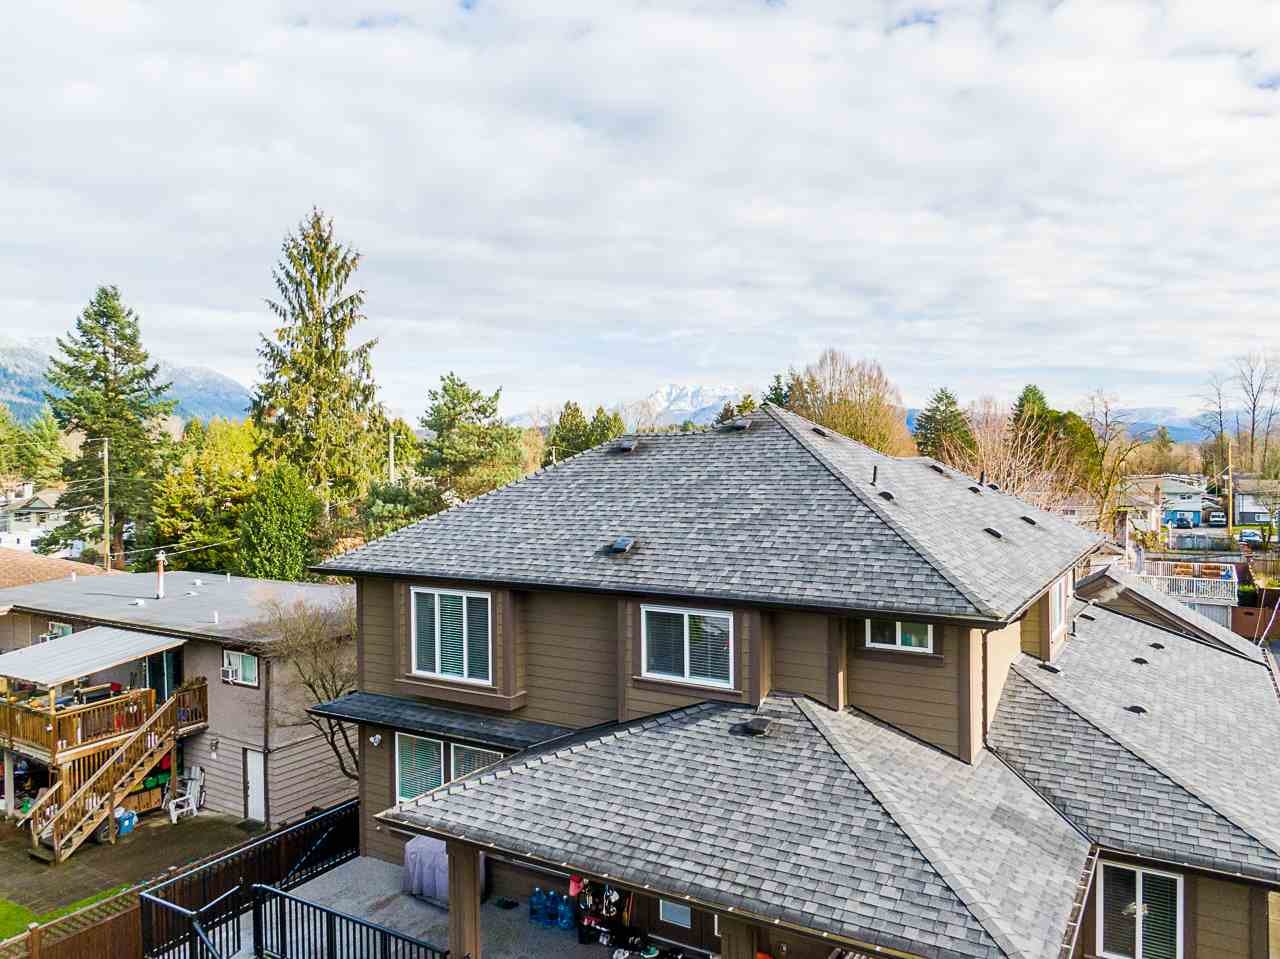 3675-Inverness-Street-Sold-By-Carolyn-Pogue-Best-Port-Moody-Realtor-34.jpeg